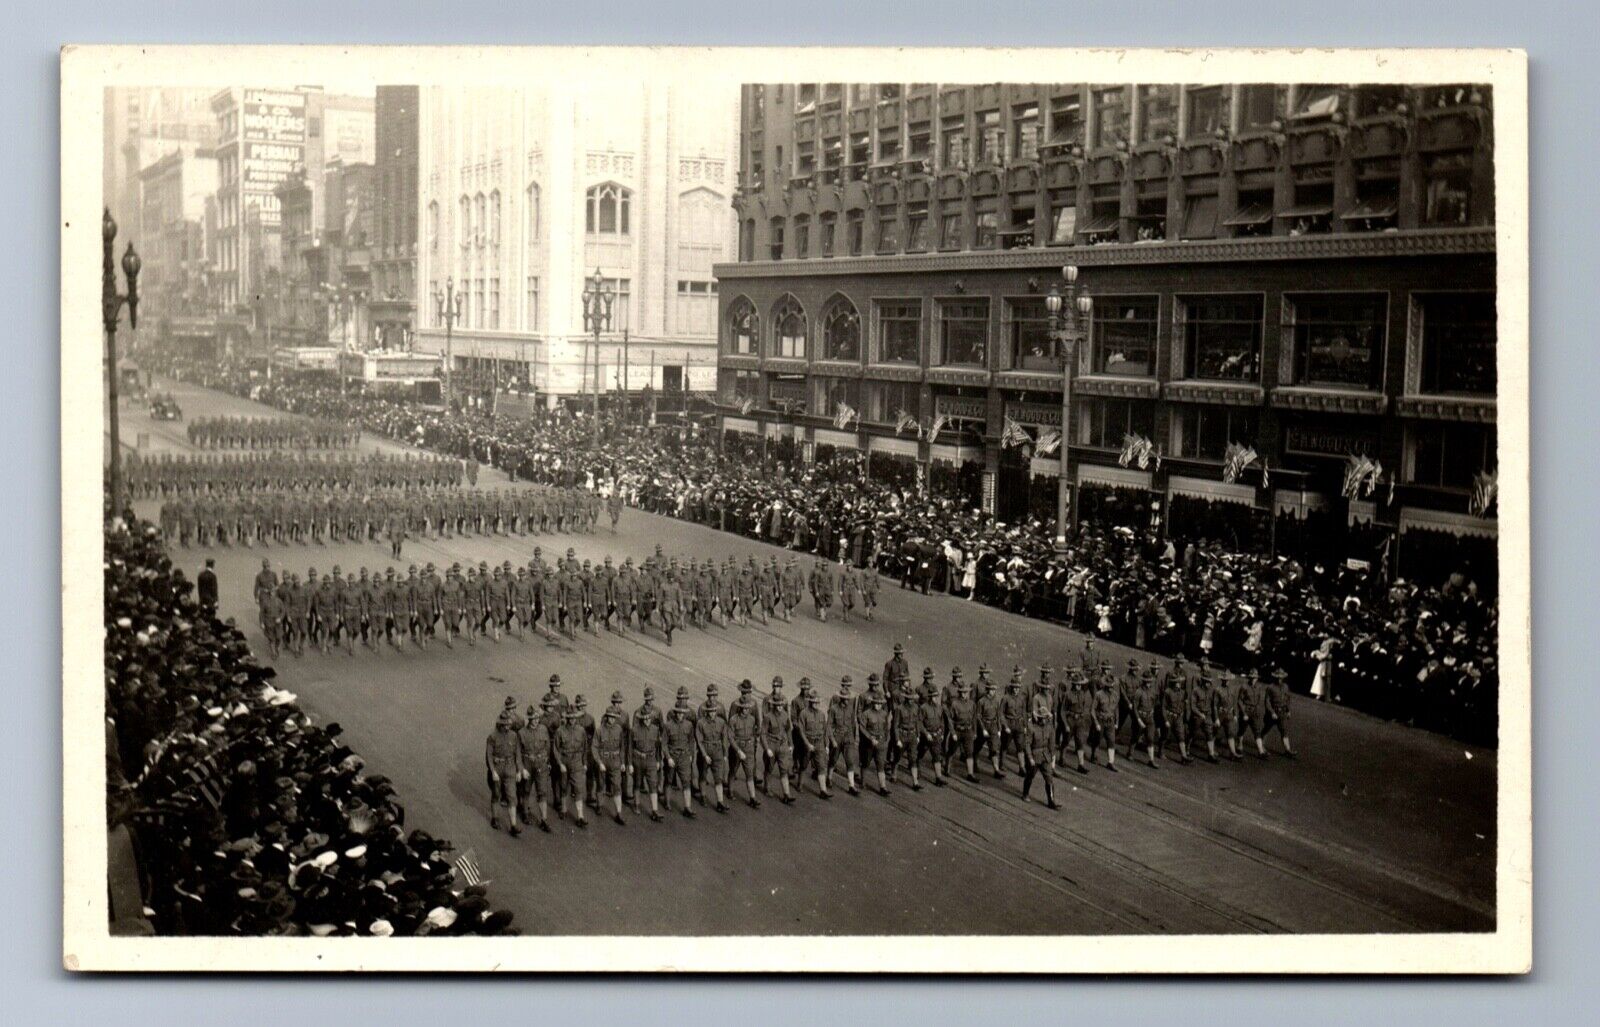 C.1918 RPPC WW1 SAN FRANCISCO CA WELCOME HOME PARADE SOLDIERS Postcard PS